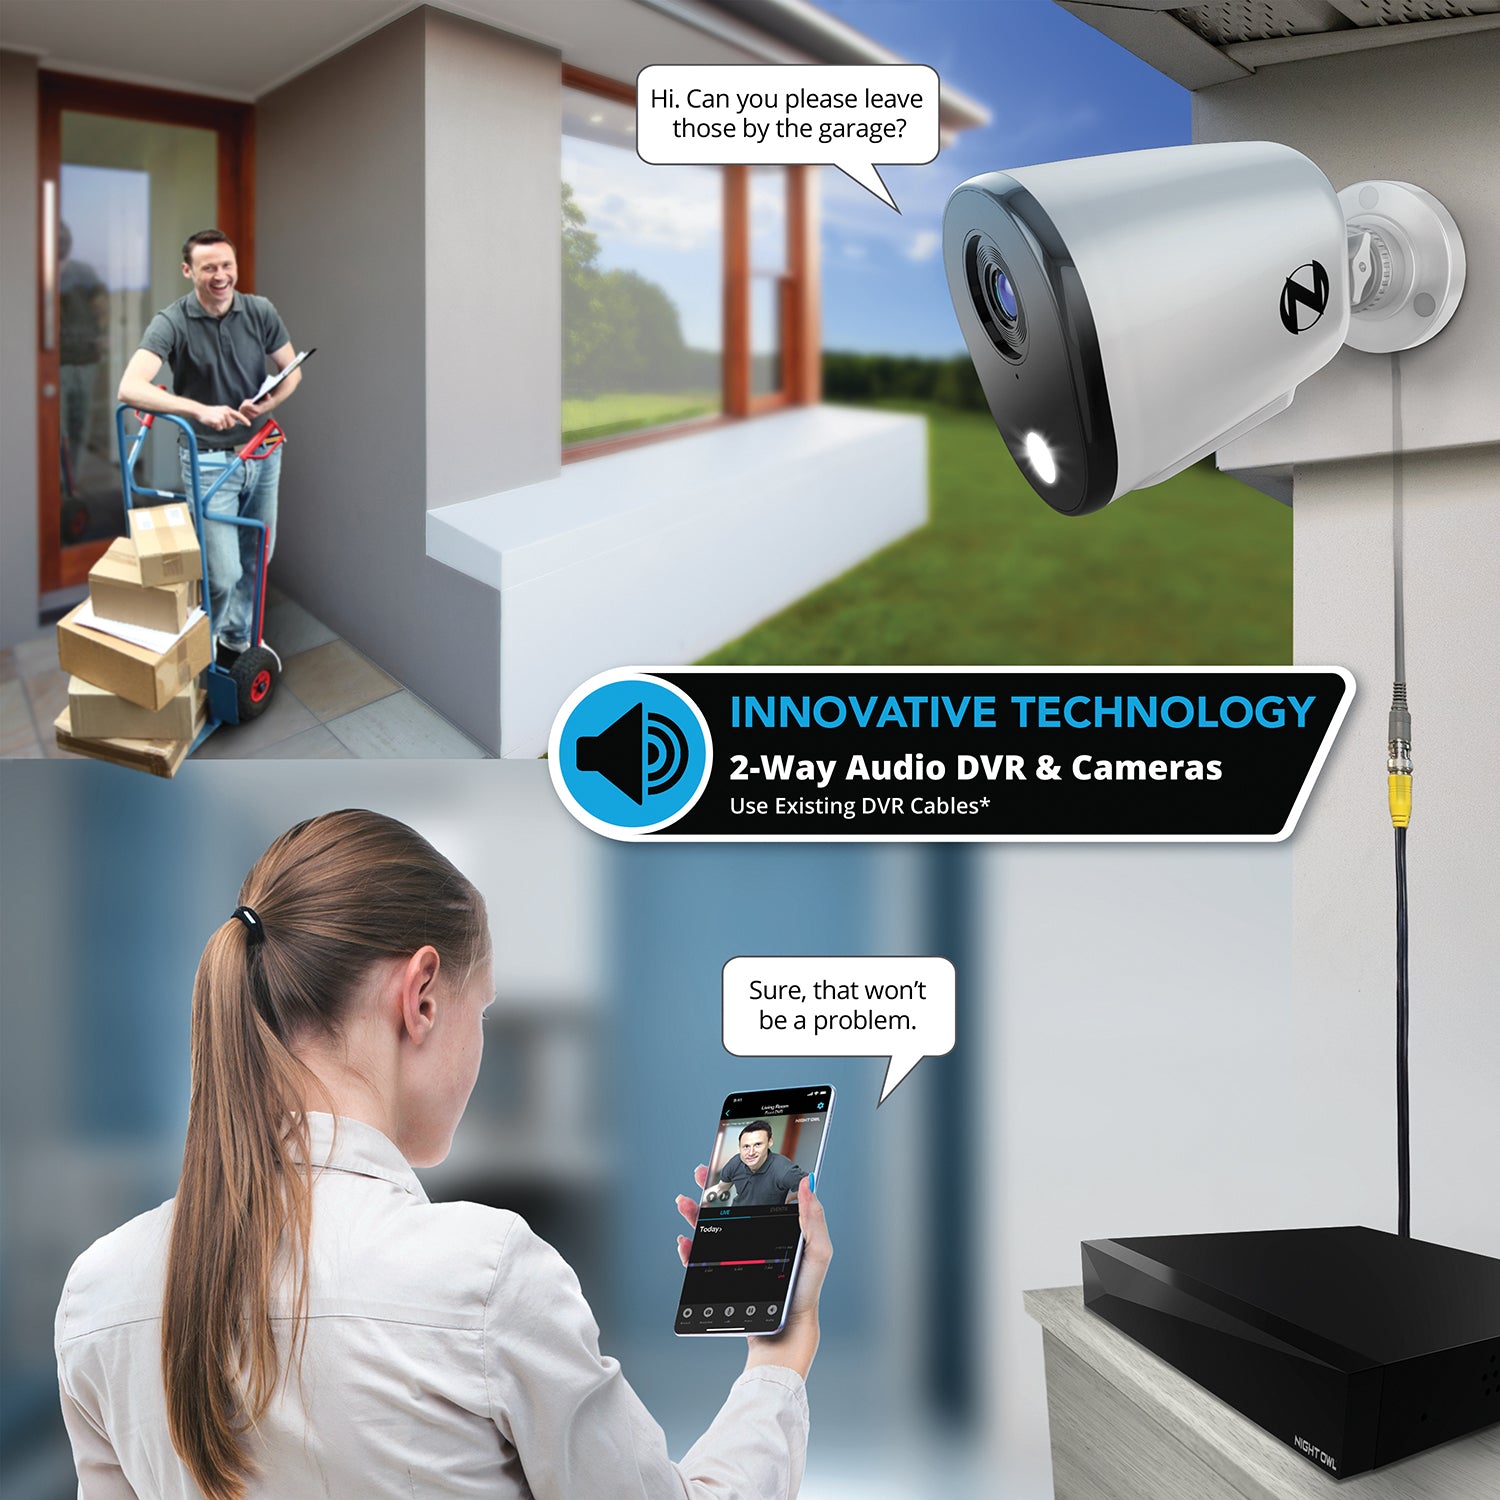 Night Owl Security Products - Home Page – Night Owl SP, LLC